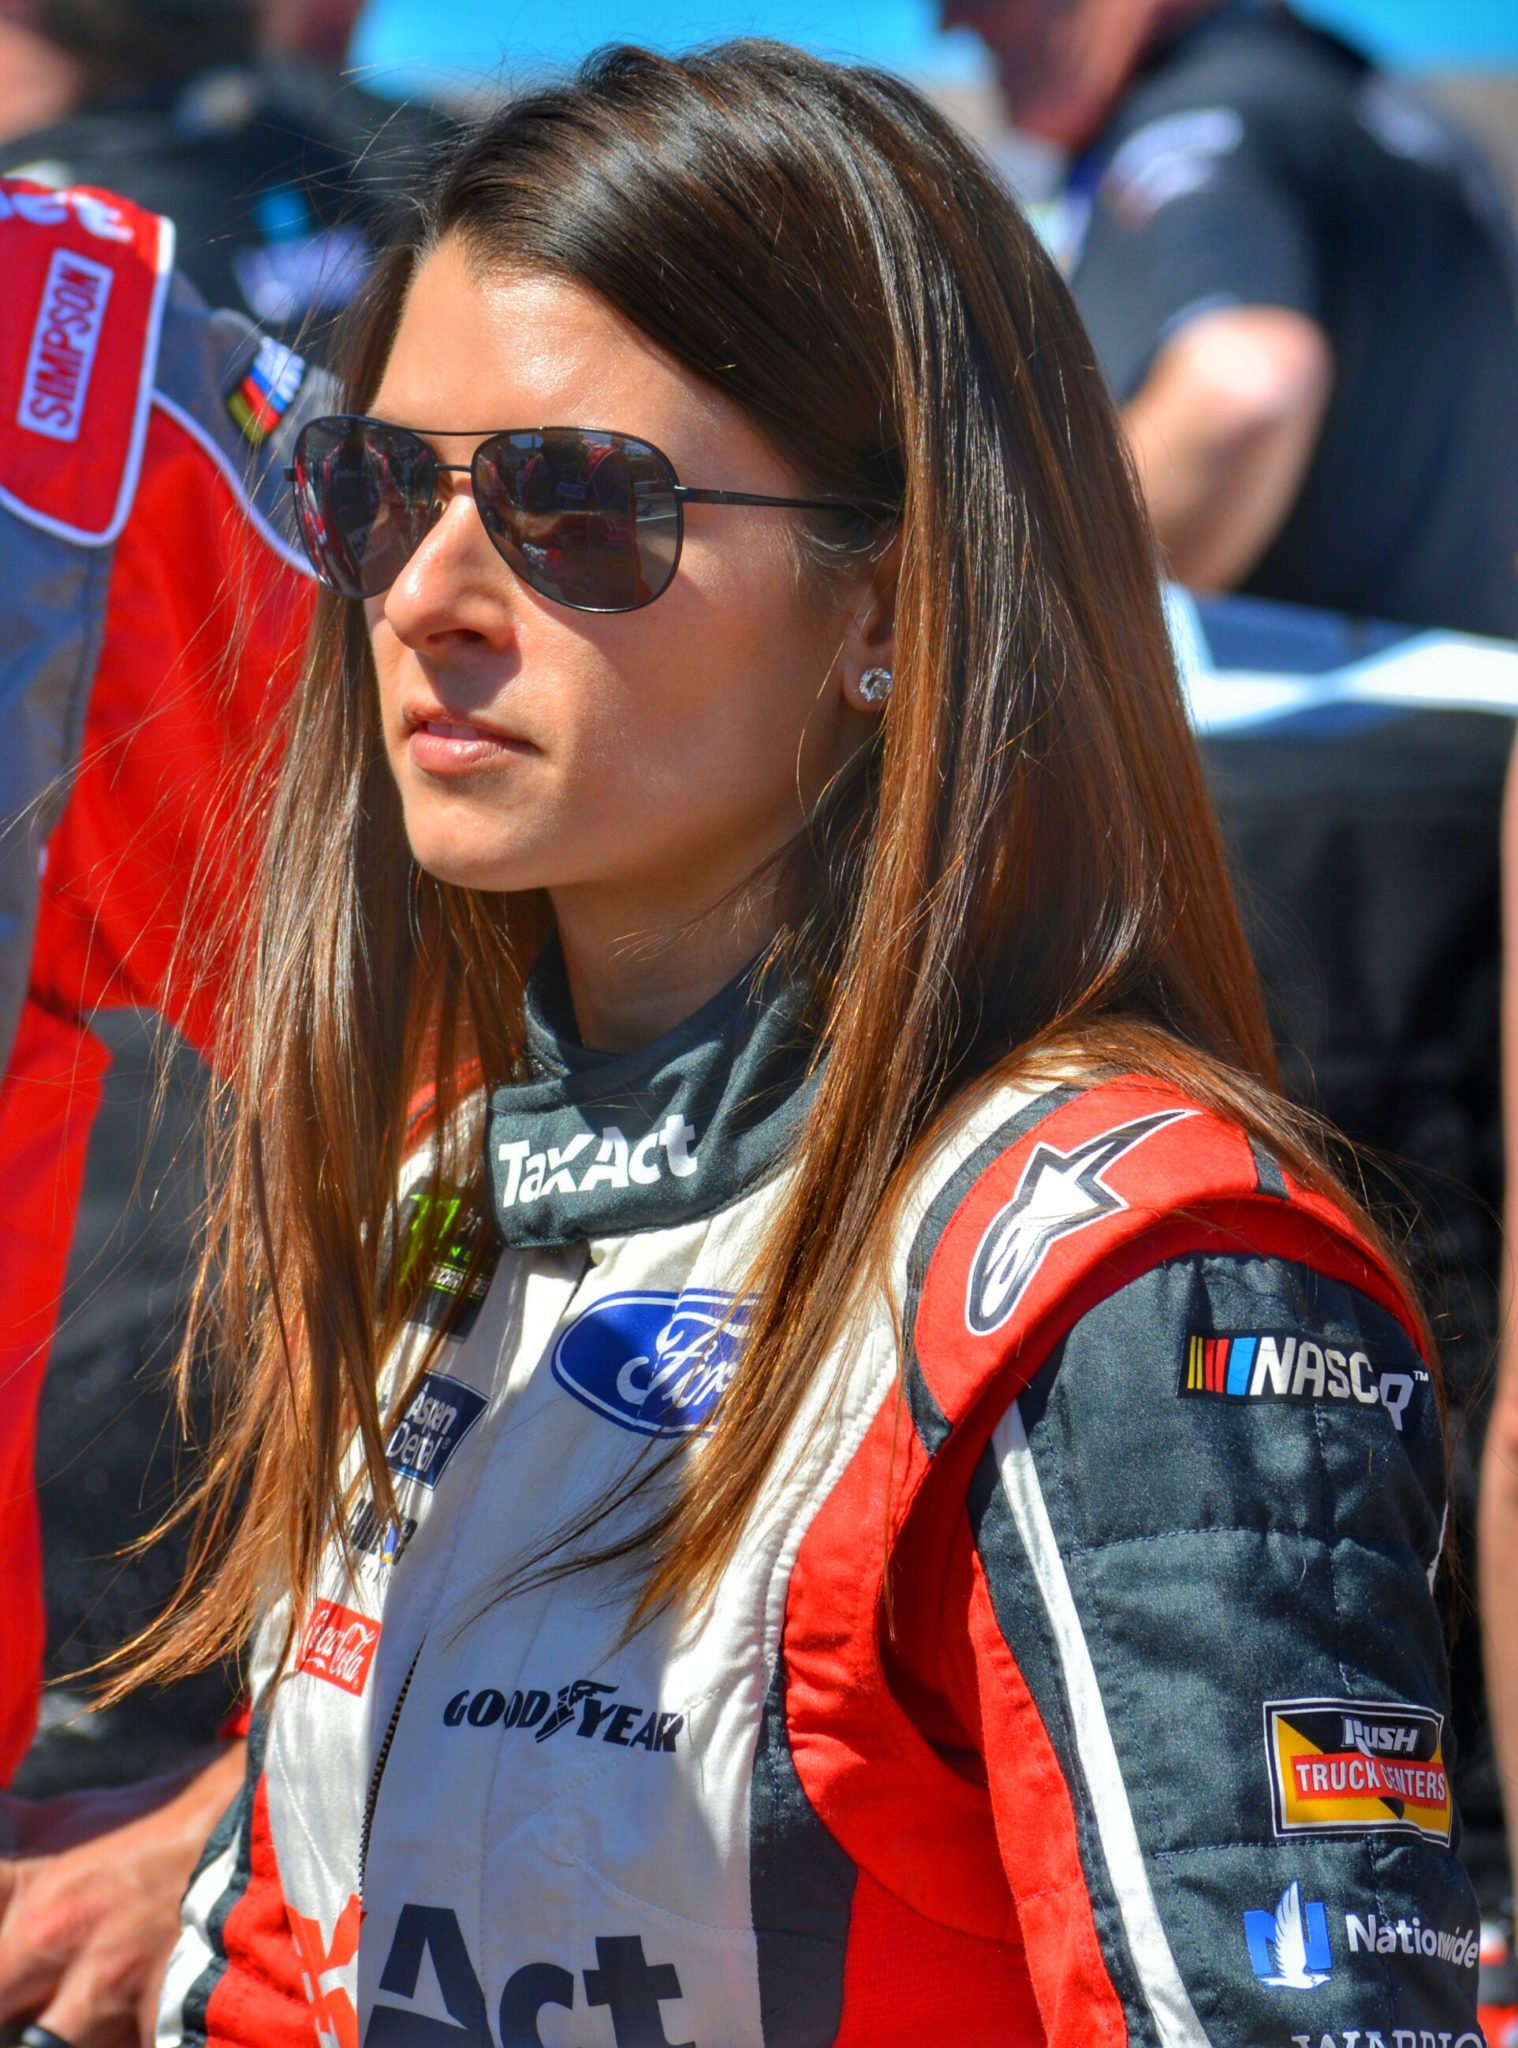 What was the name of the racing series Danica Patrick competed in before joining the IndyCar Series?